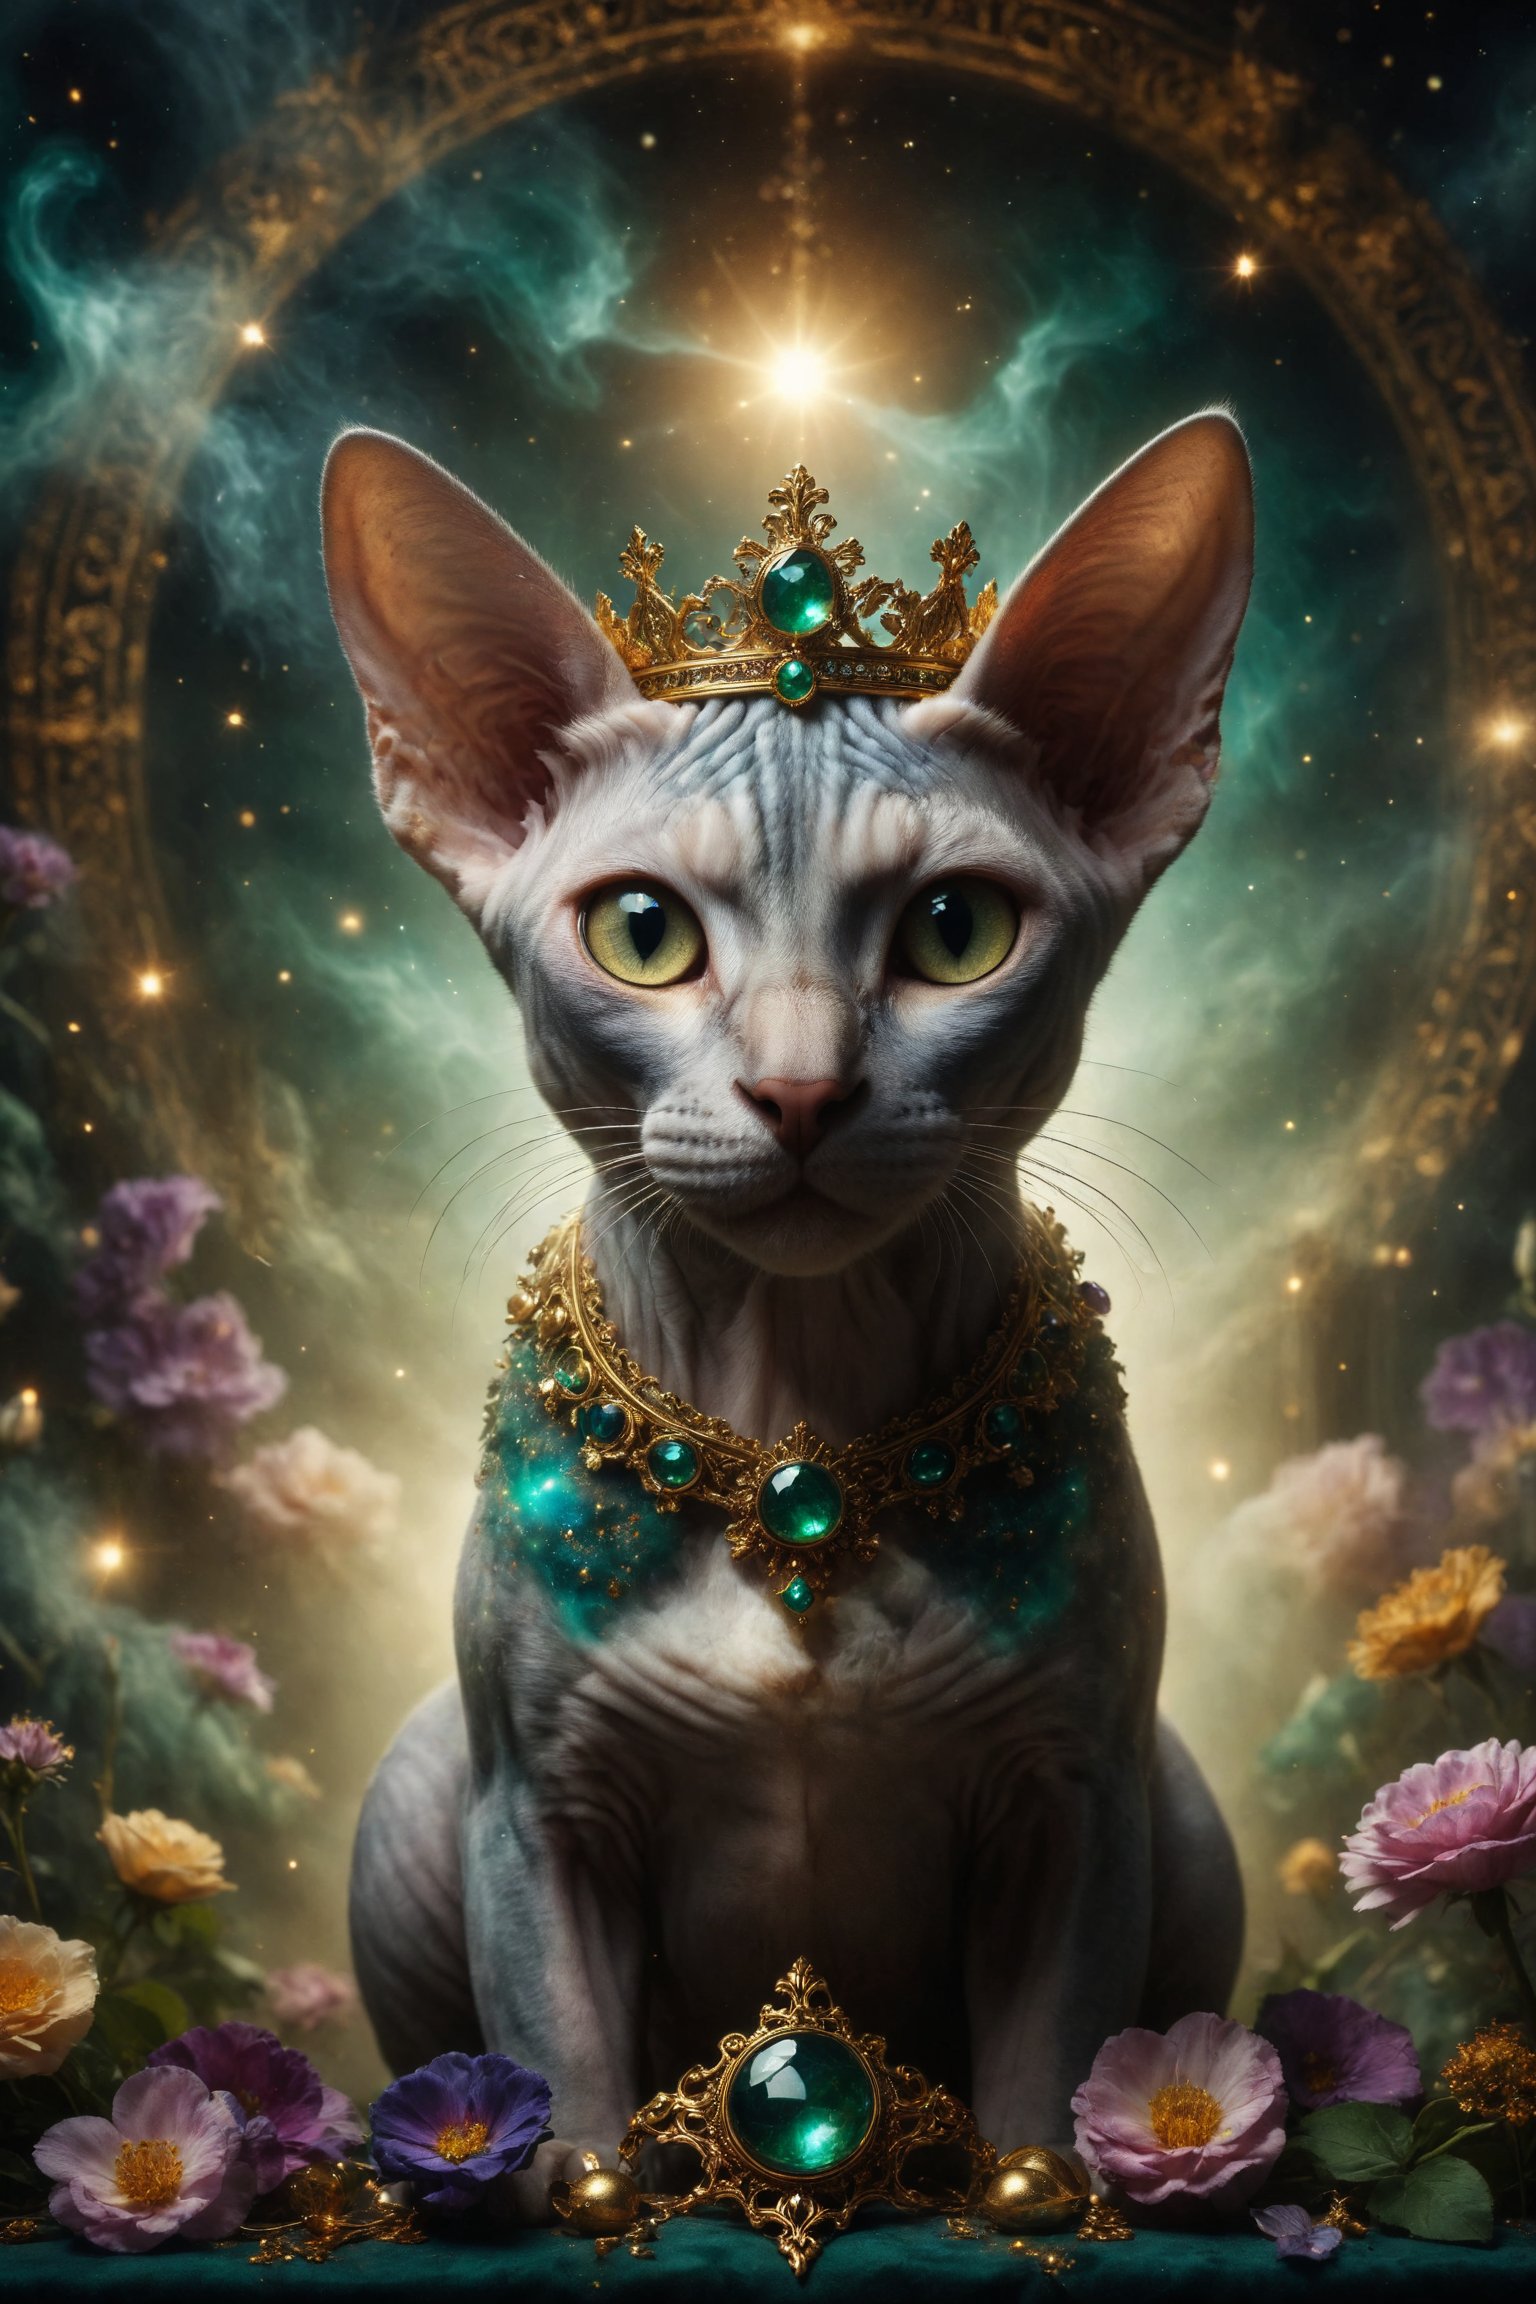 The central image should be a majestic Sphynx cat with wing majestic whit, a starry background and astrological symbols. The cat wears a golden crown and is surrounded by a halo of golden light. At the bottom, he added subtle, ornate floral details in gold and emerald tones. with magic particles, and smoke, fabric luxury, Use deep, rich colors such as dark blue, deep purple and gold to give a sense of mystery and spirituality. The design should evoke a sense of luxury and magic, inviting the user to explore the world of tarot with reverence and wonder.